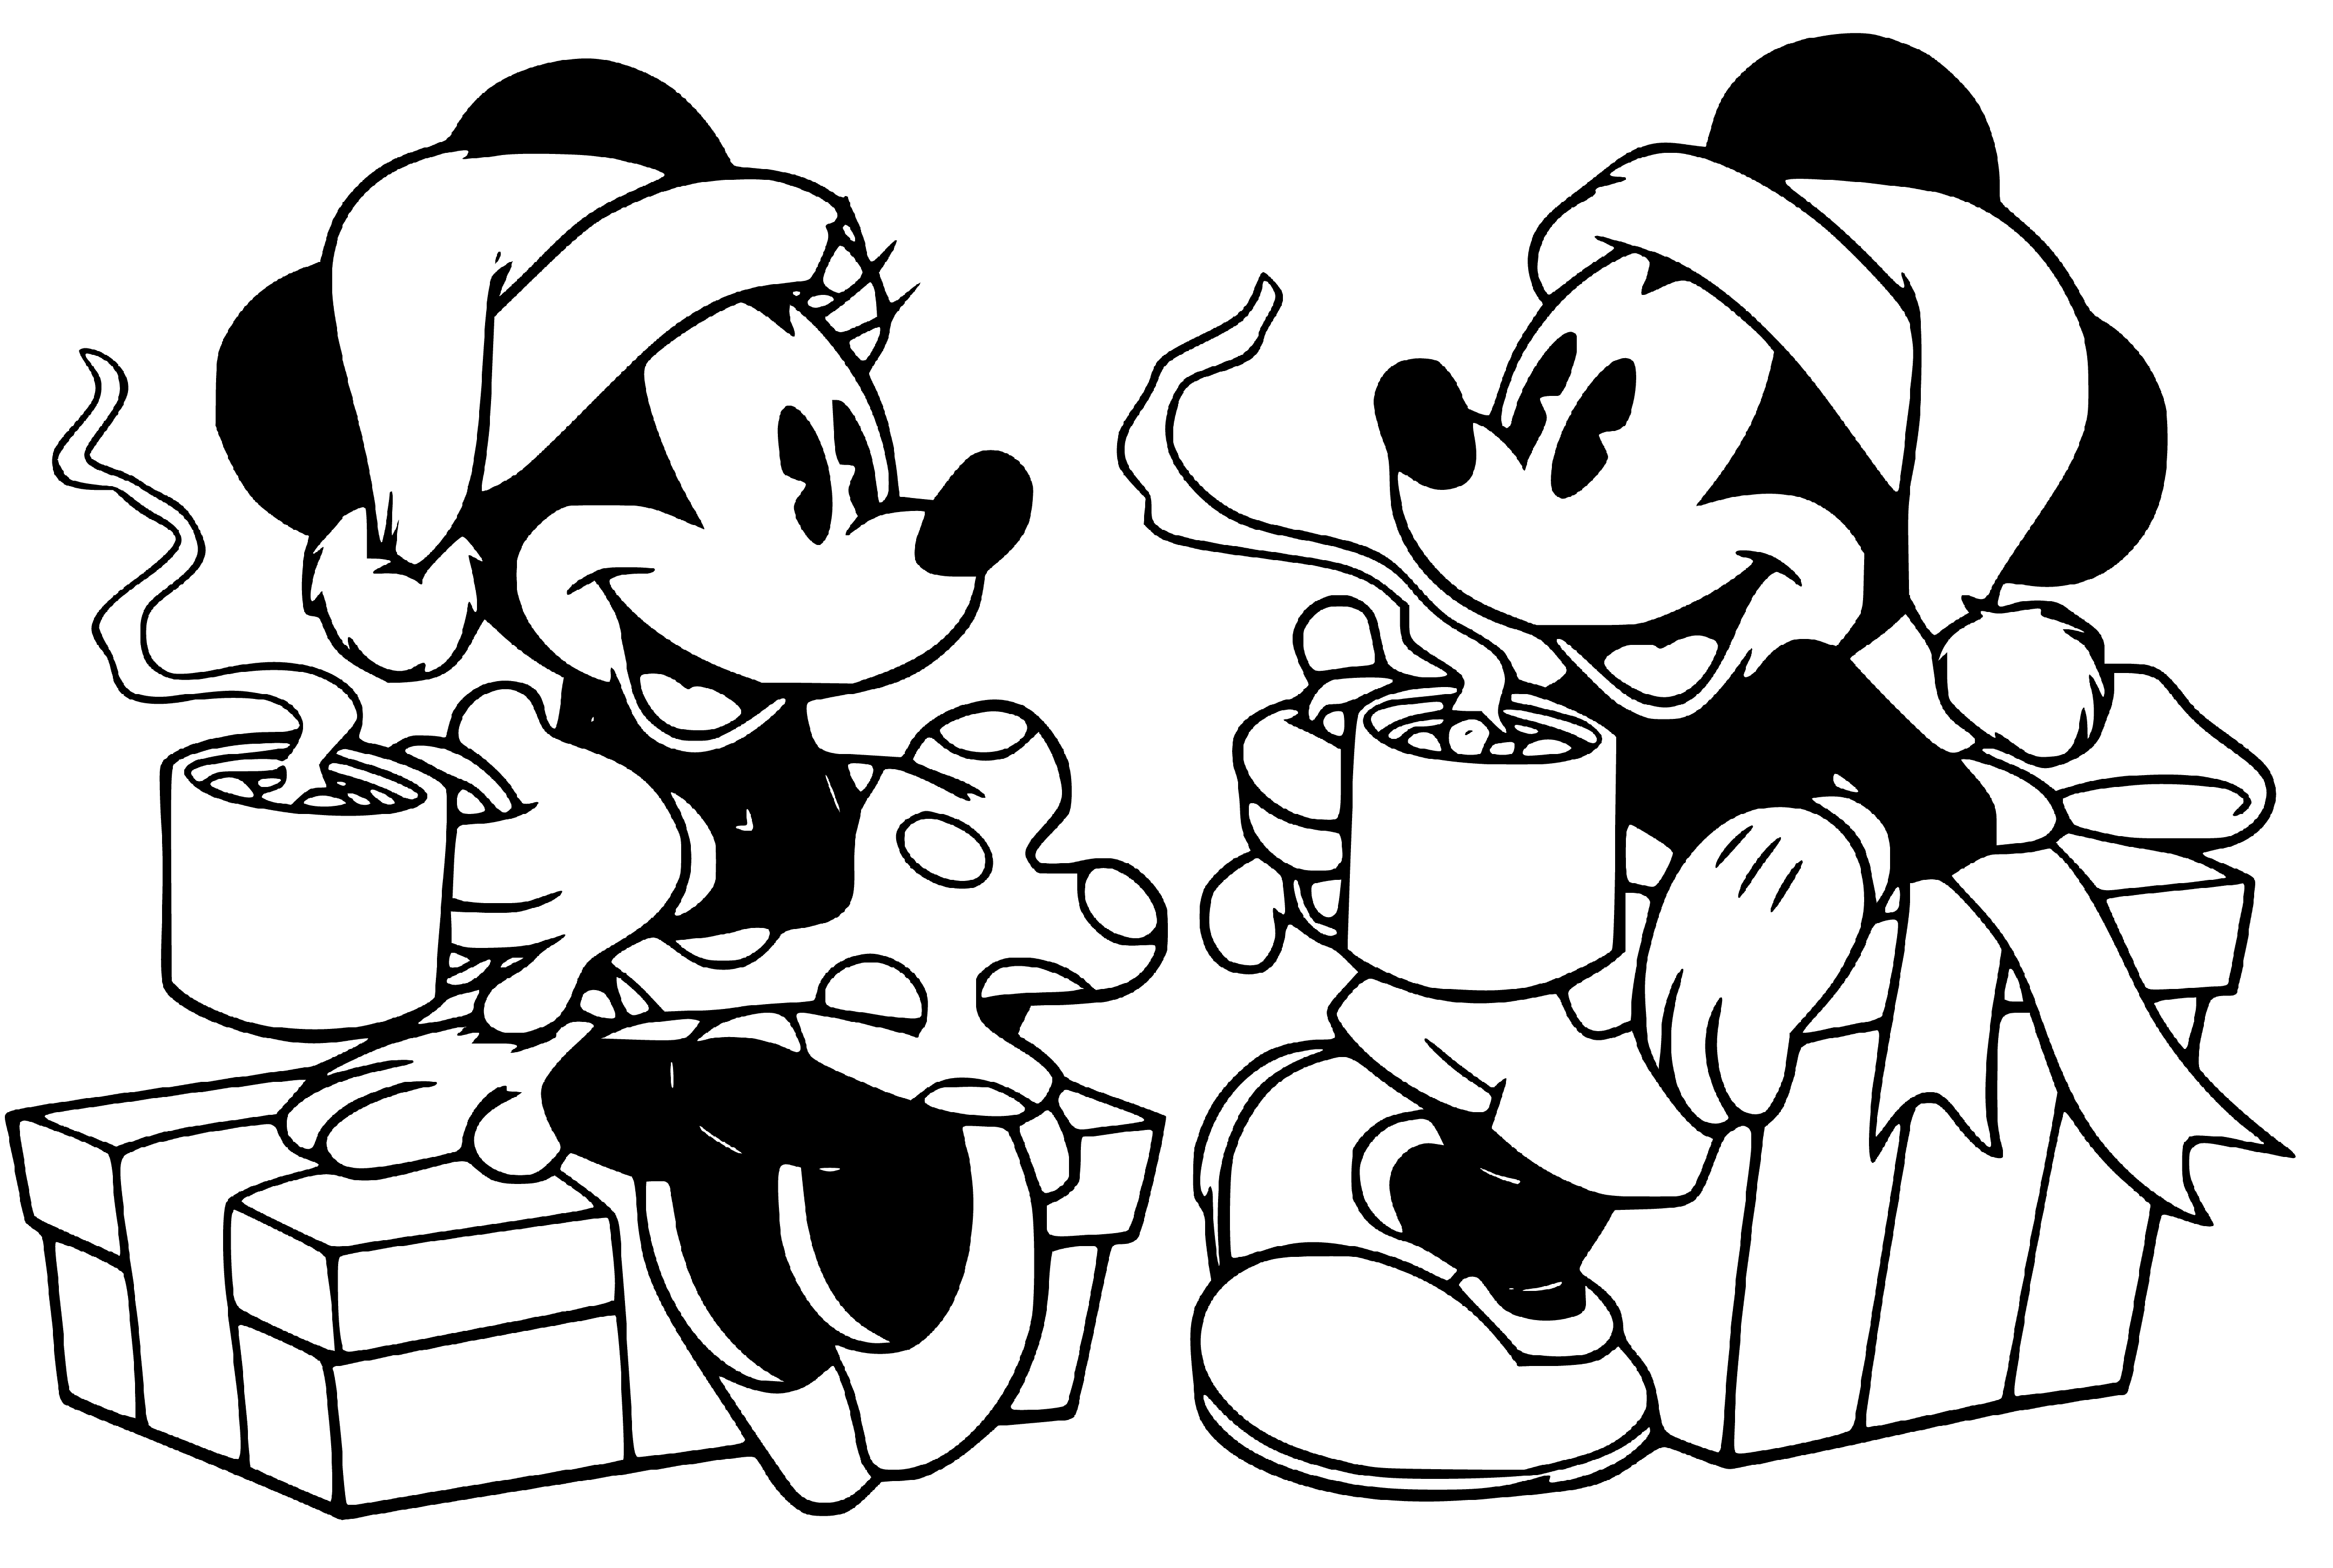 Printable Mickey and Minnie drinking cofee Coloring Page for kids.